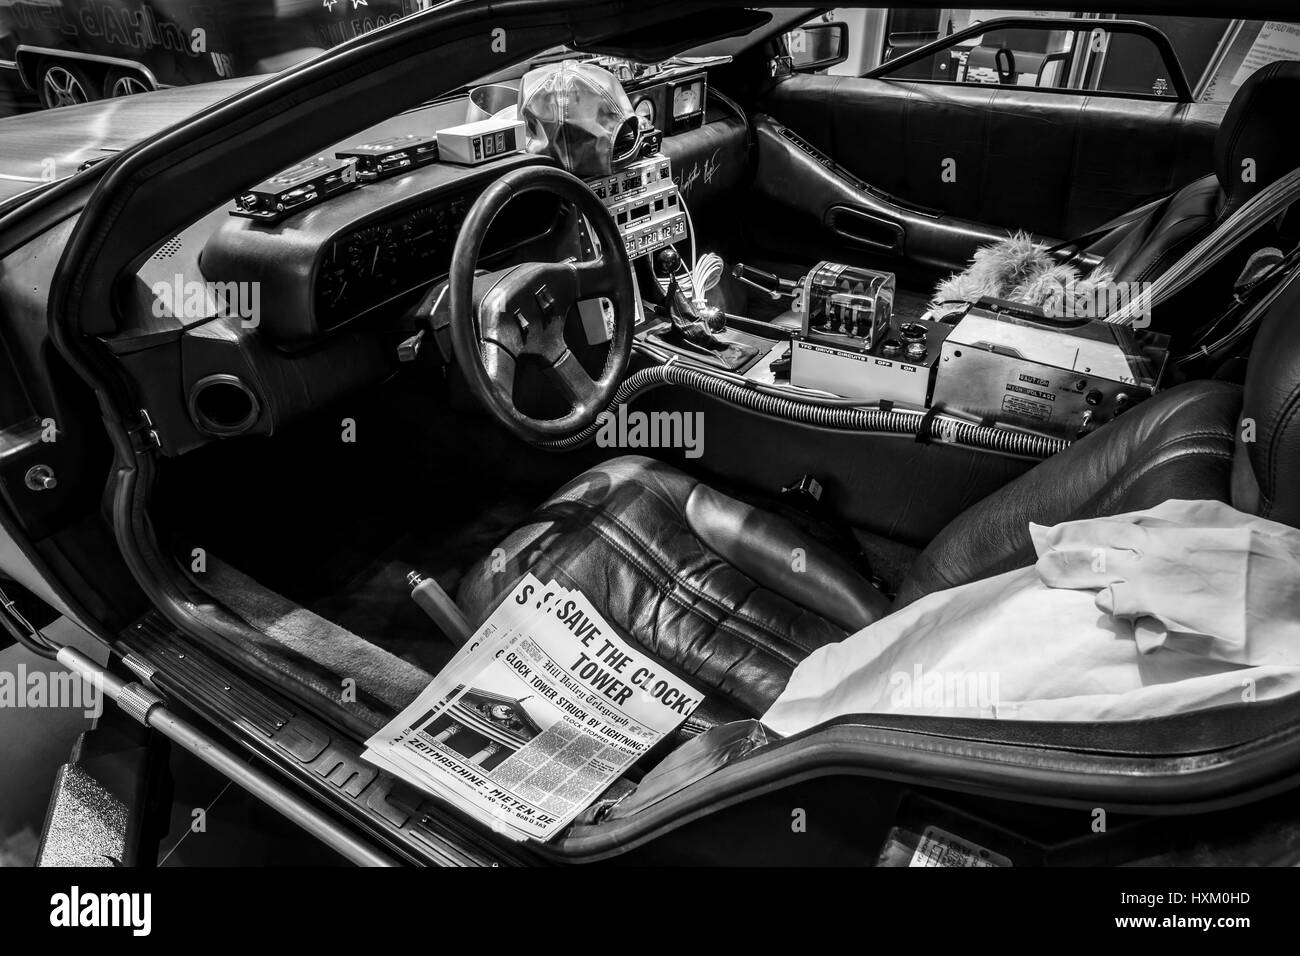 Cabin of the DeLorean time machine (Back to the Future franchise) based on a DeLorean DMC-12 sports car. Black and white. Stock Photo